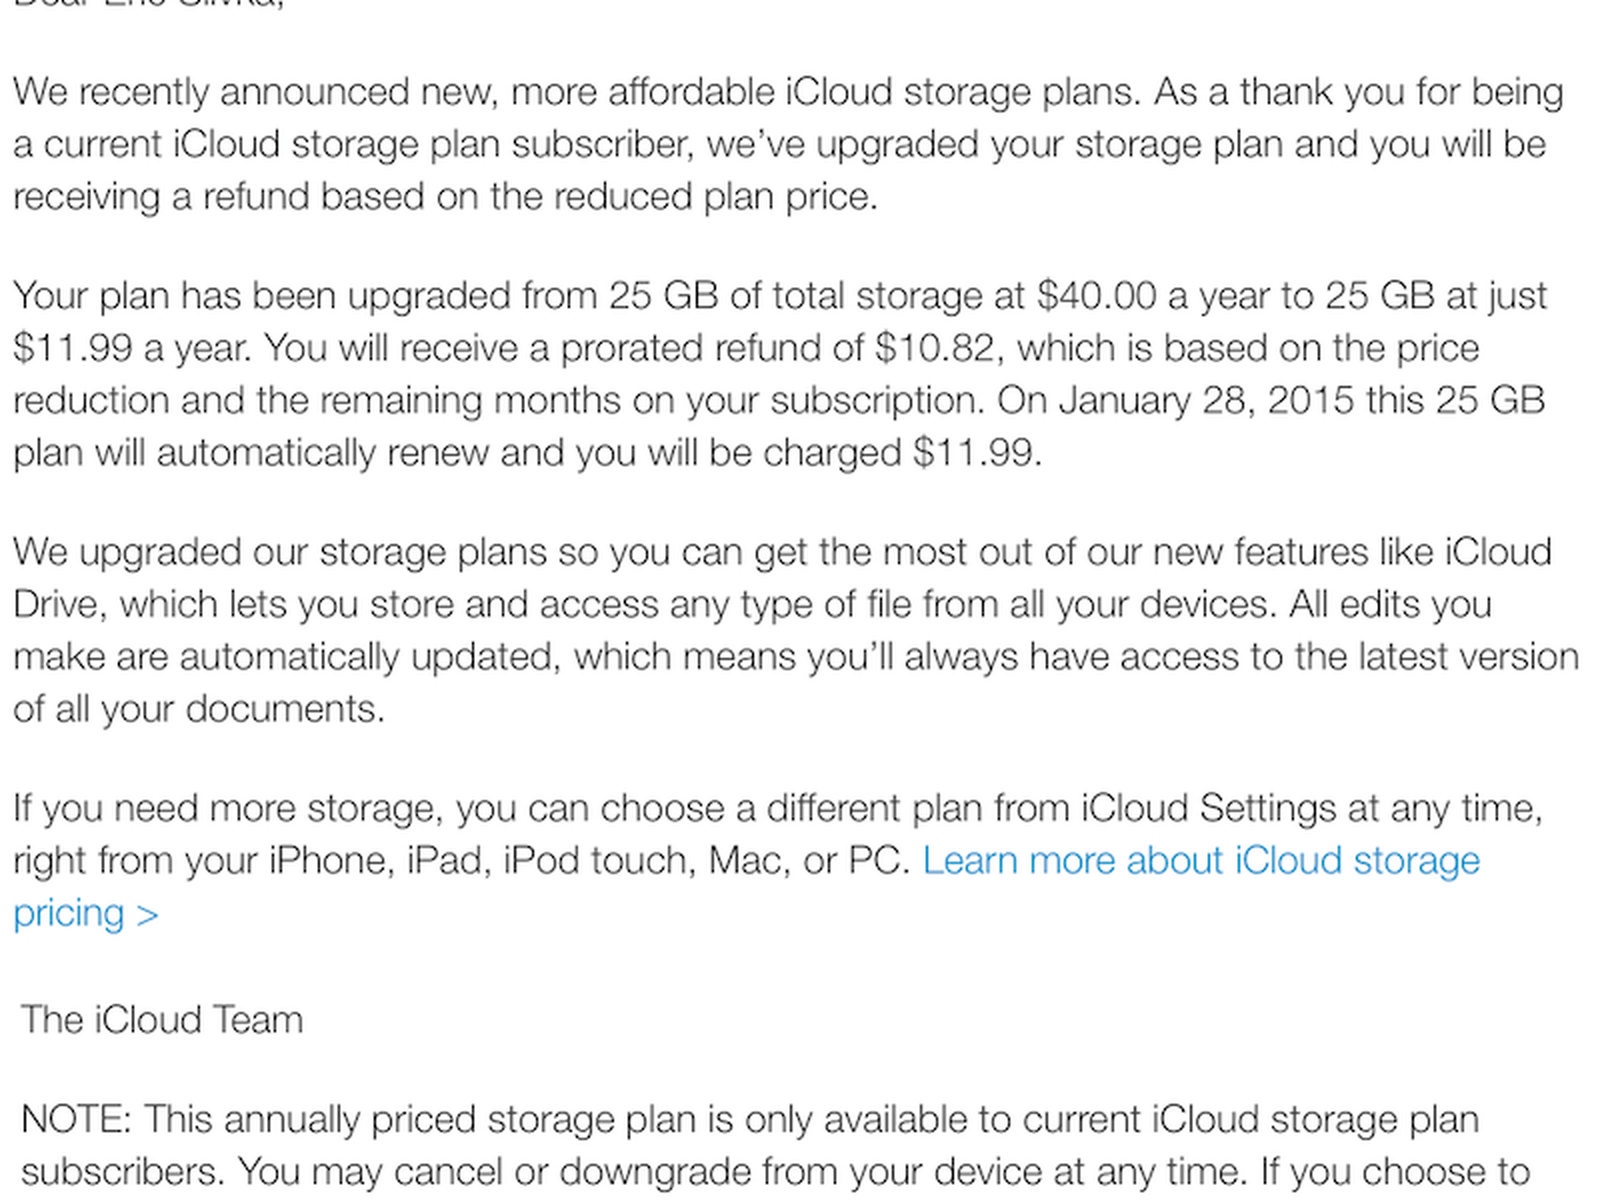 Apple Upgrading Existing Icloud Subscribers To More Affordable Plans Macrumors